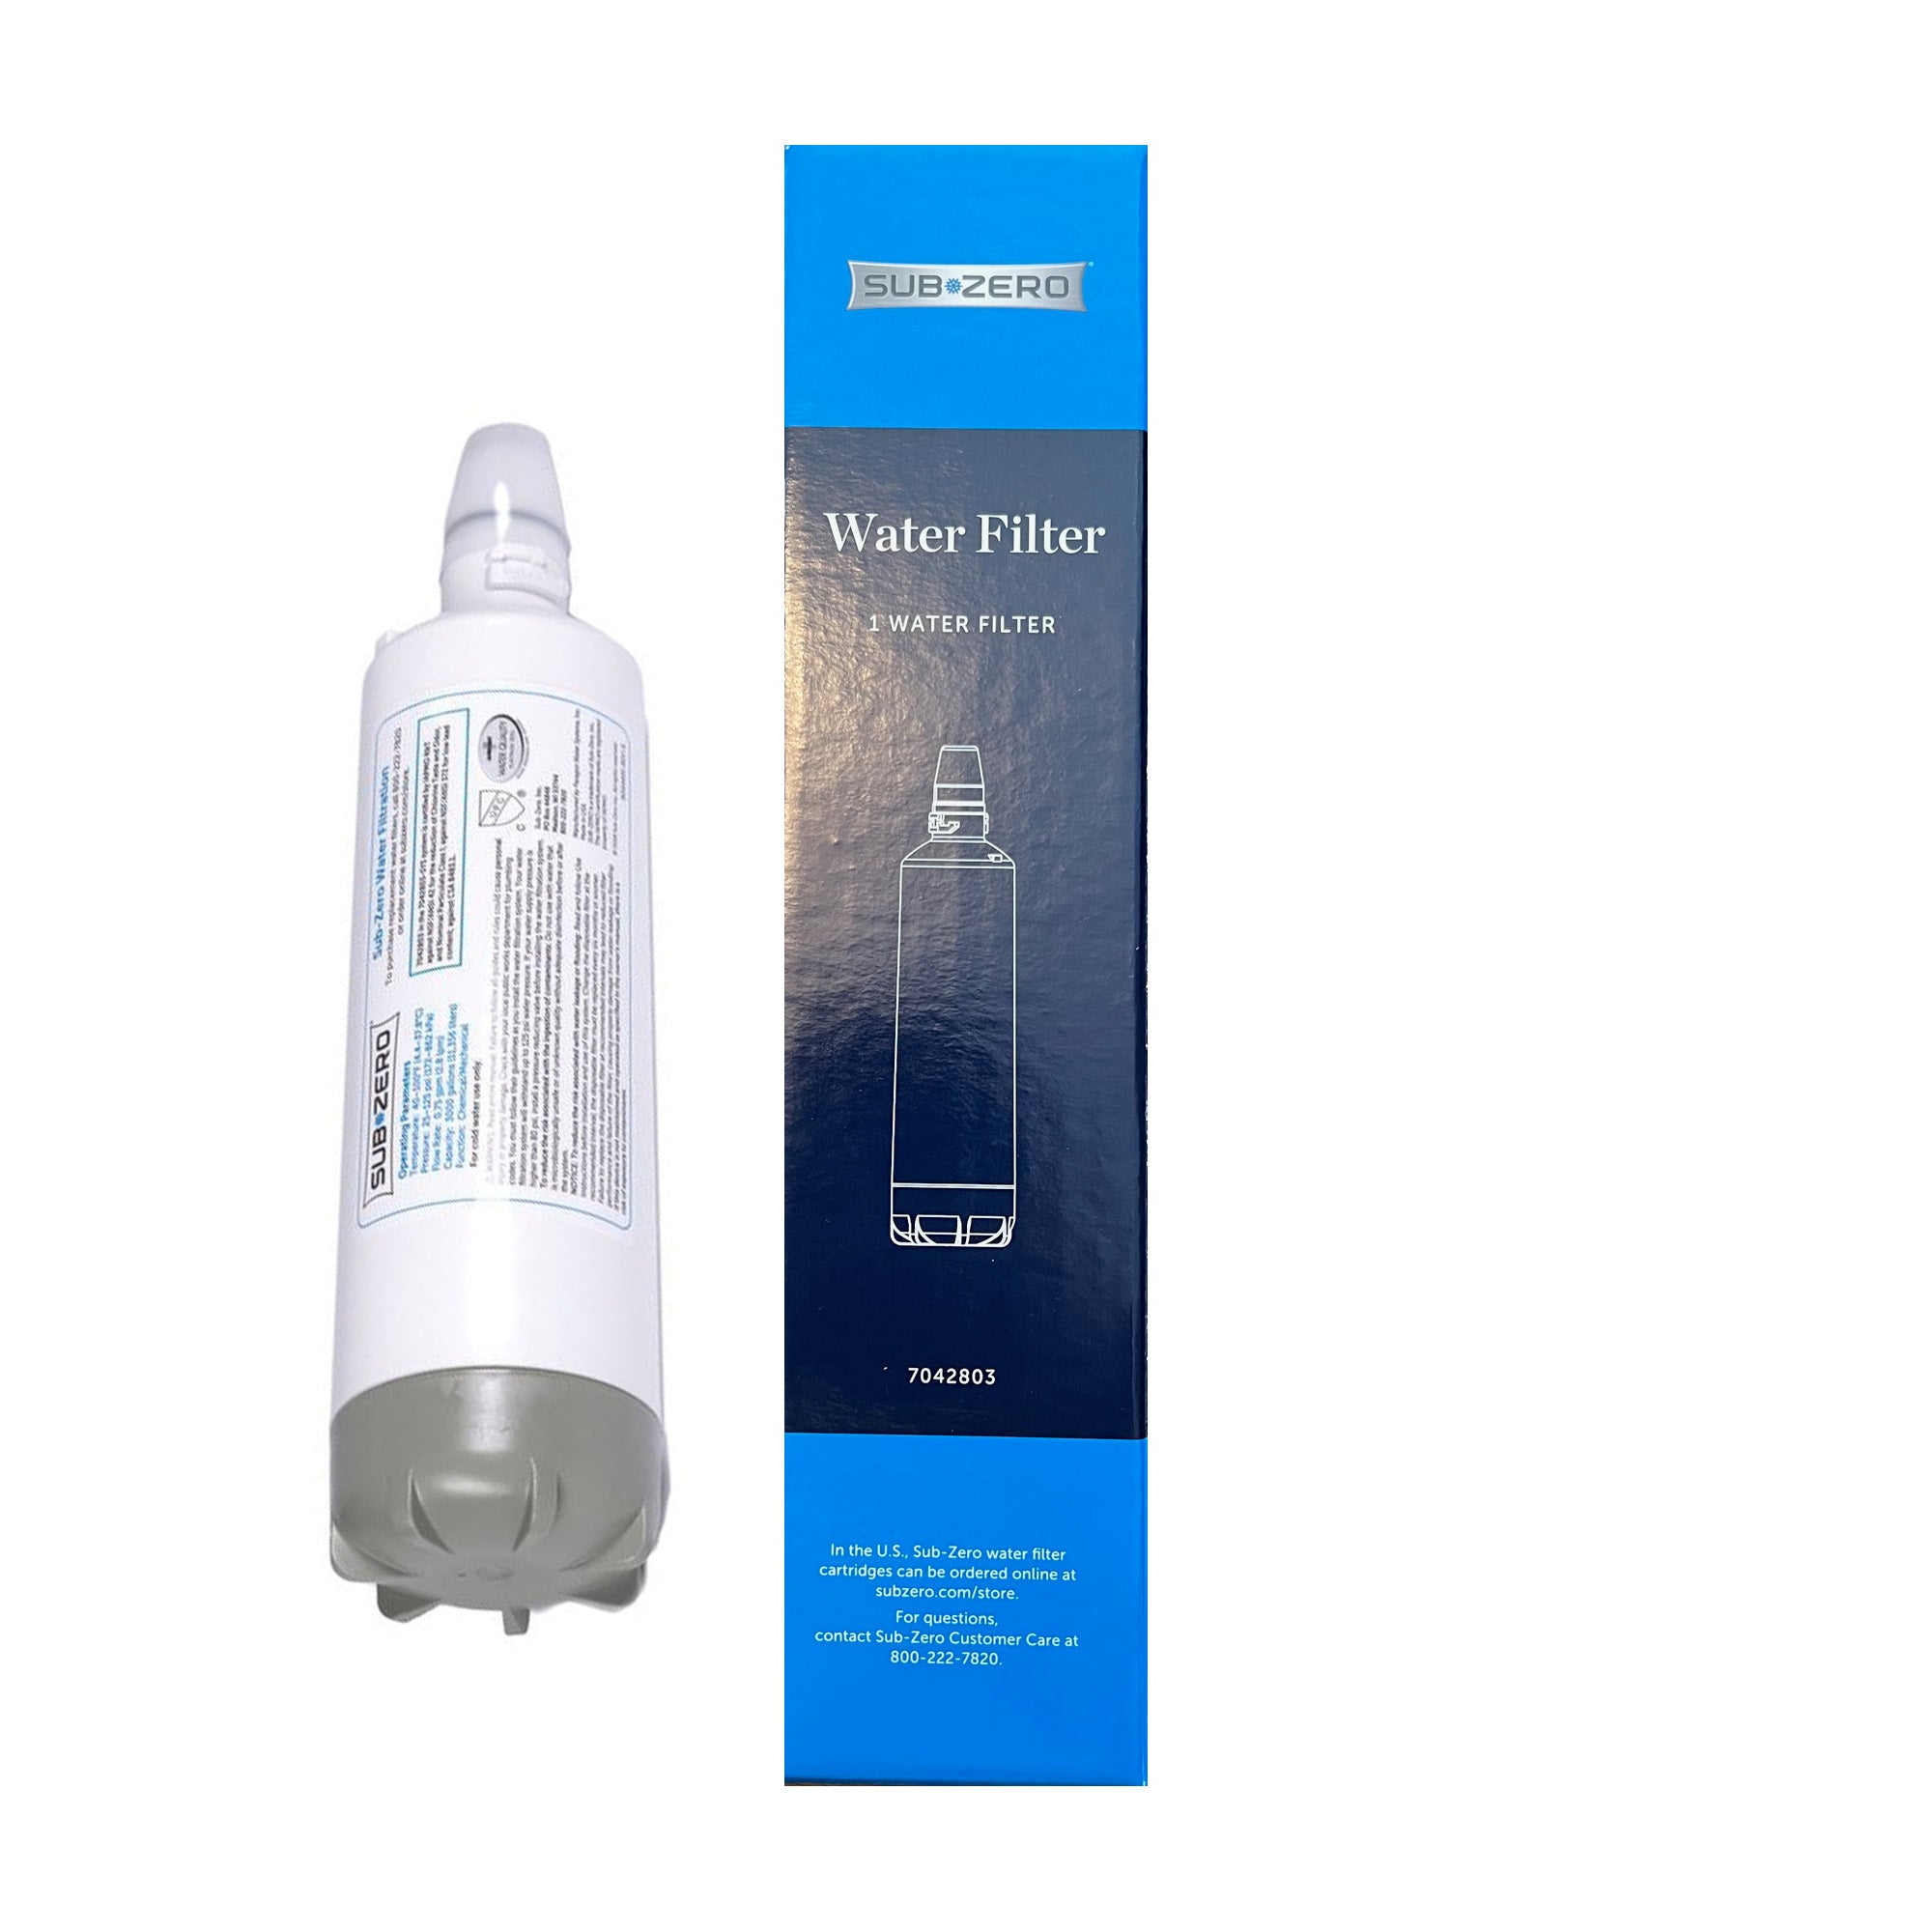 Sub-Zero UC-15 Ice Maker Water Filter Replacement